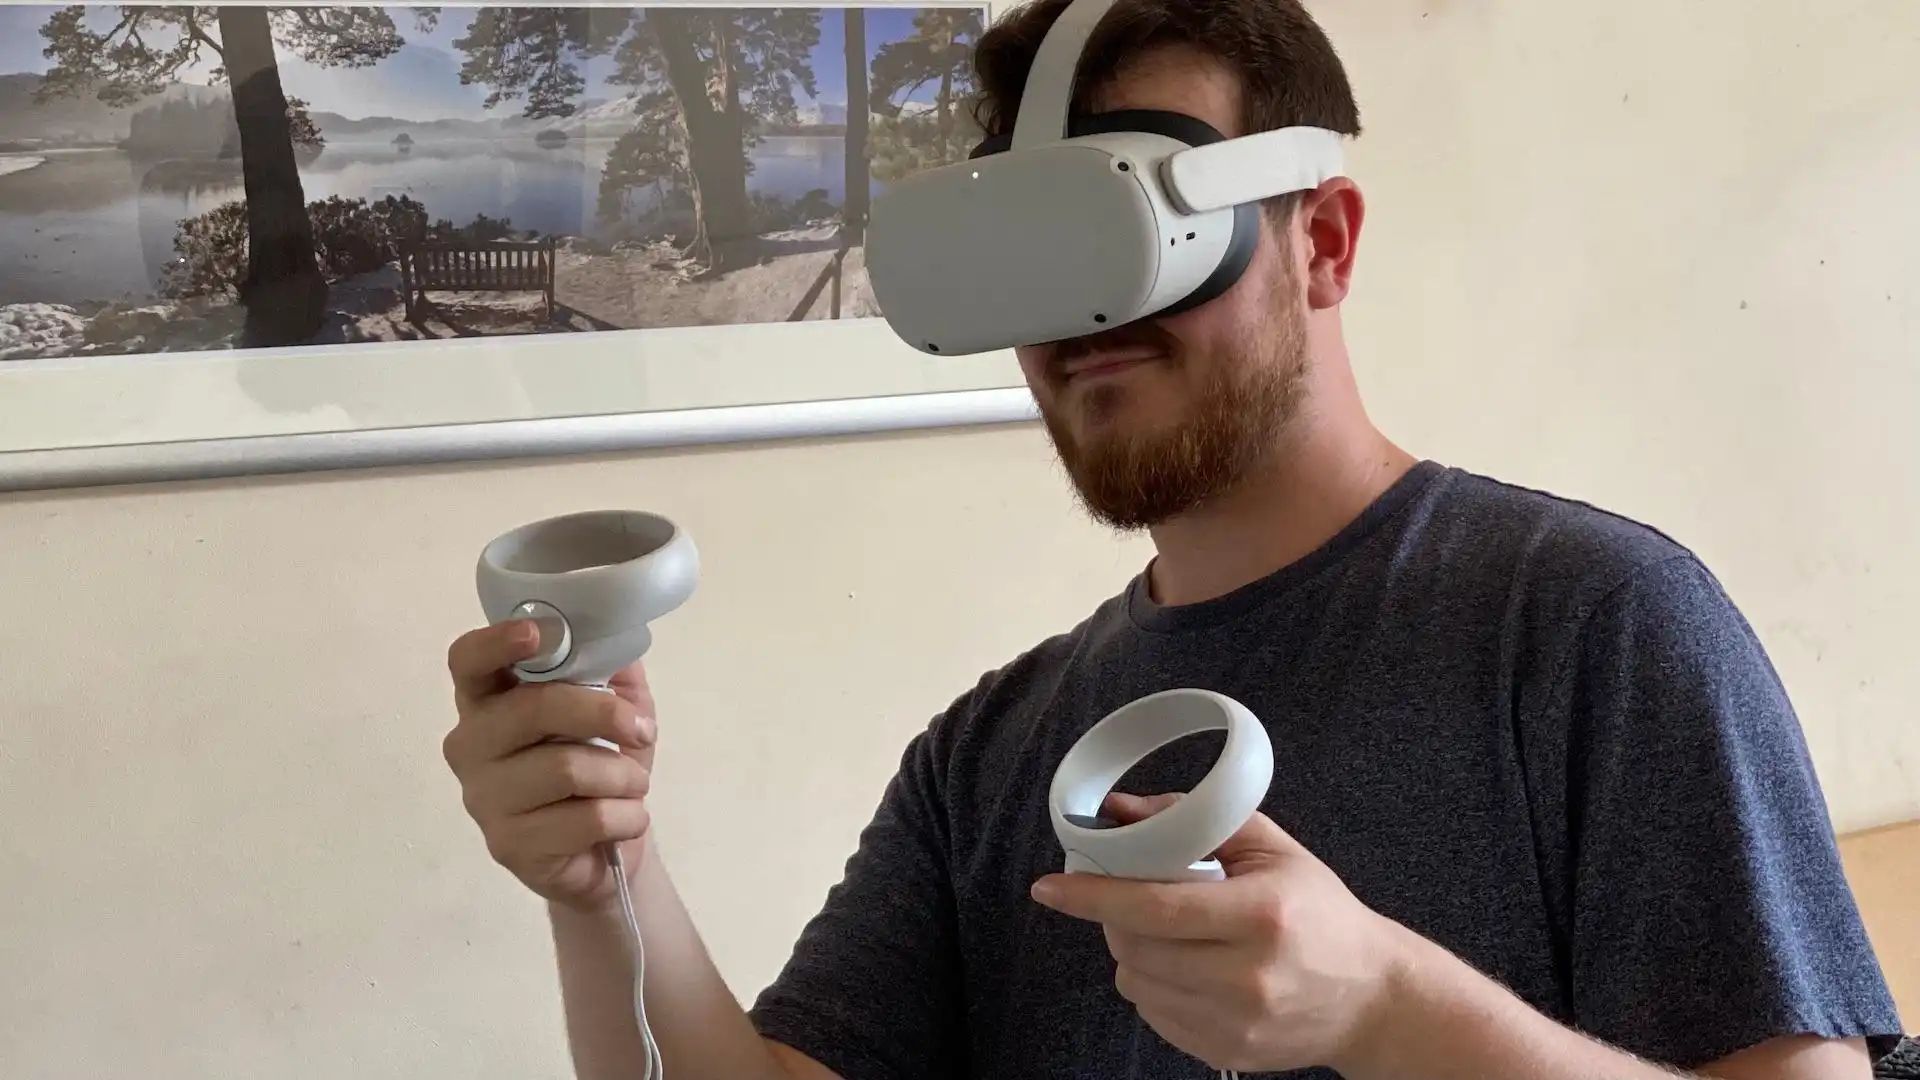 How To Go To The Metaverse With Oculus Quest 2